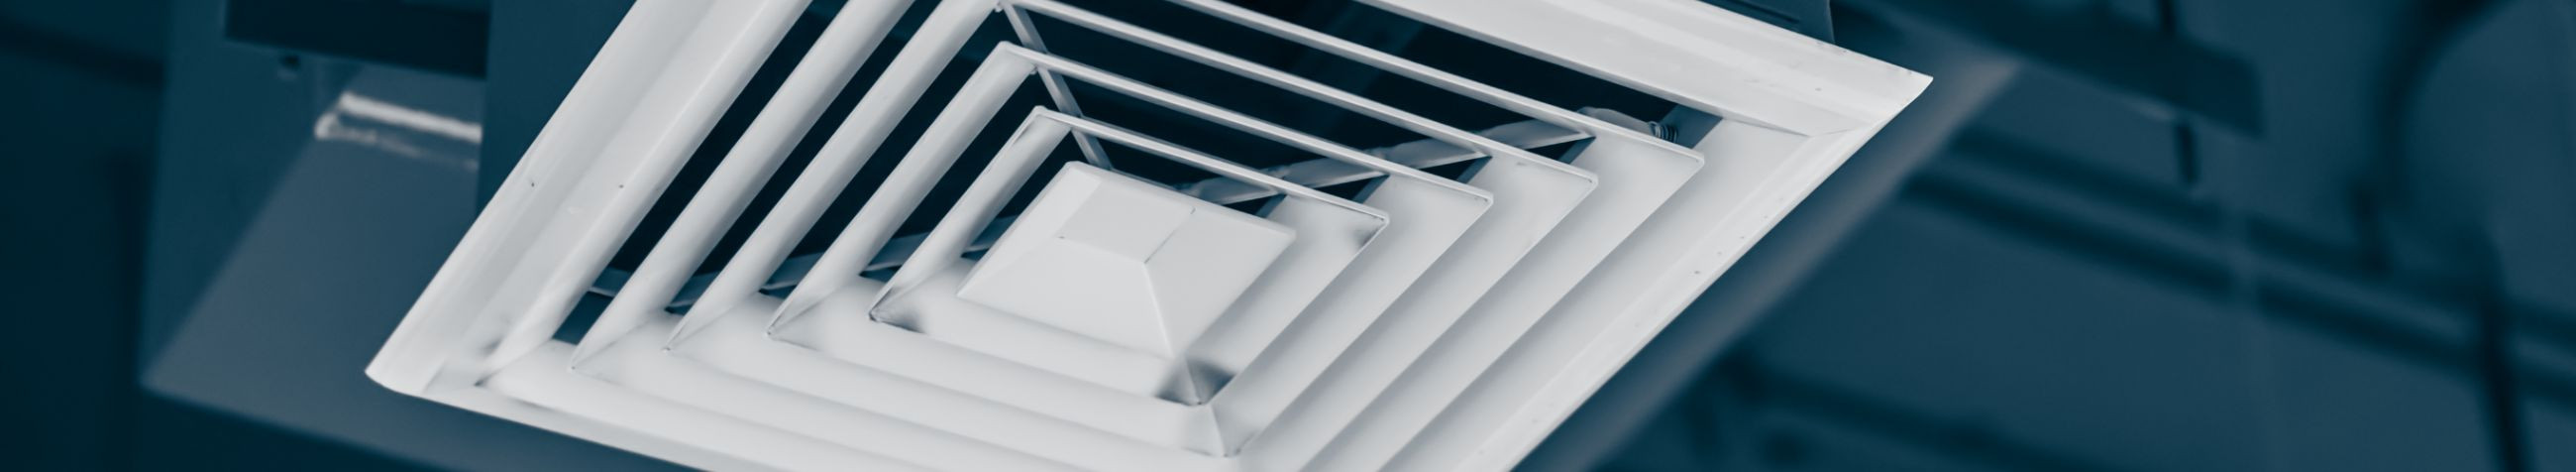 We specialize in the design, installation, and maintenance of custom ventilation systems.